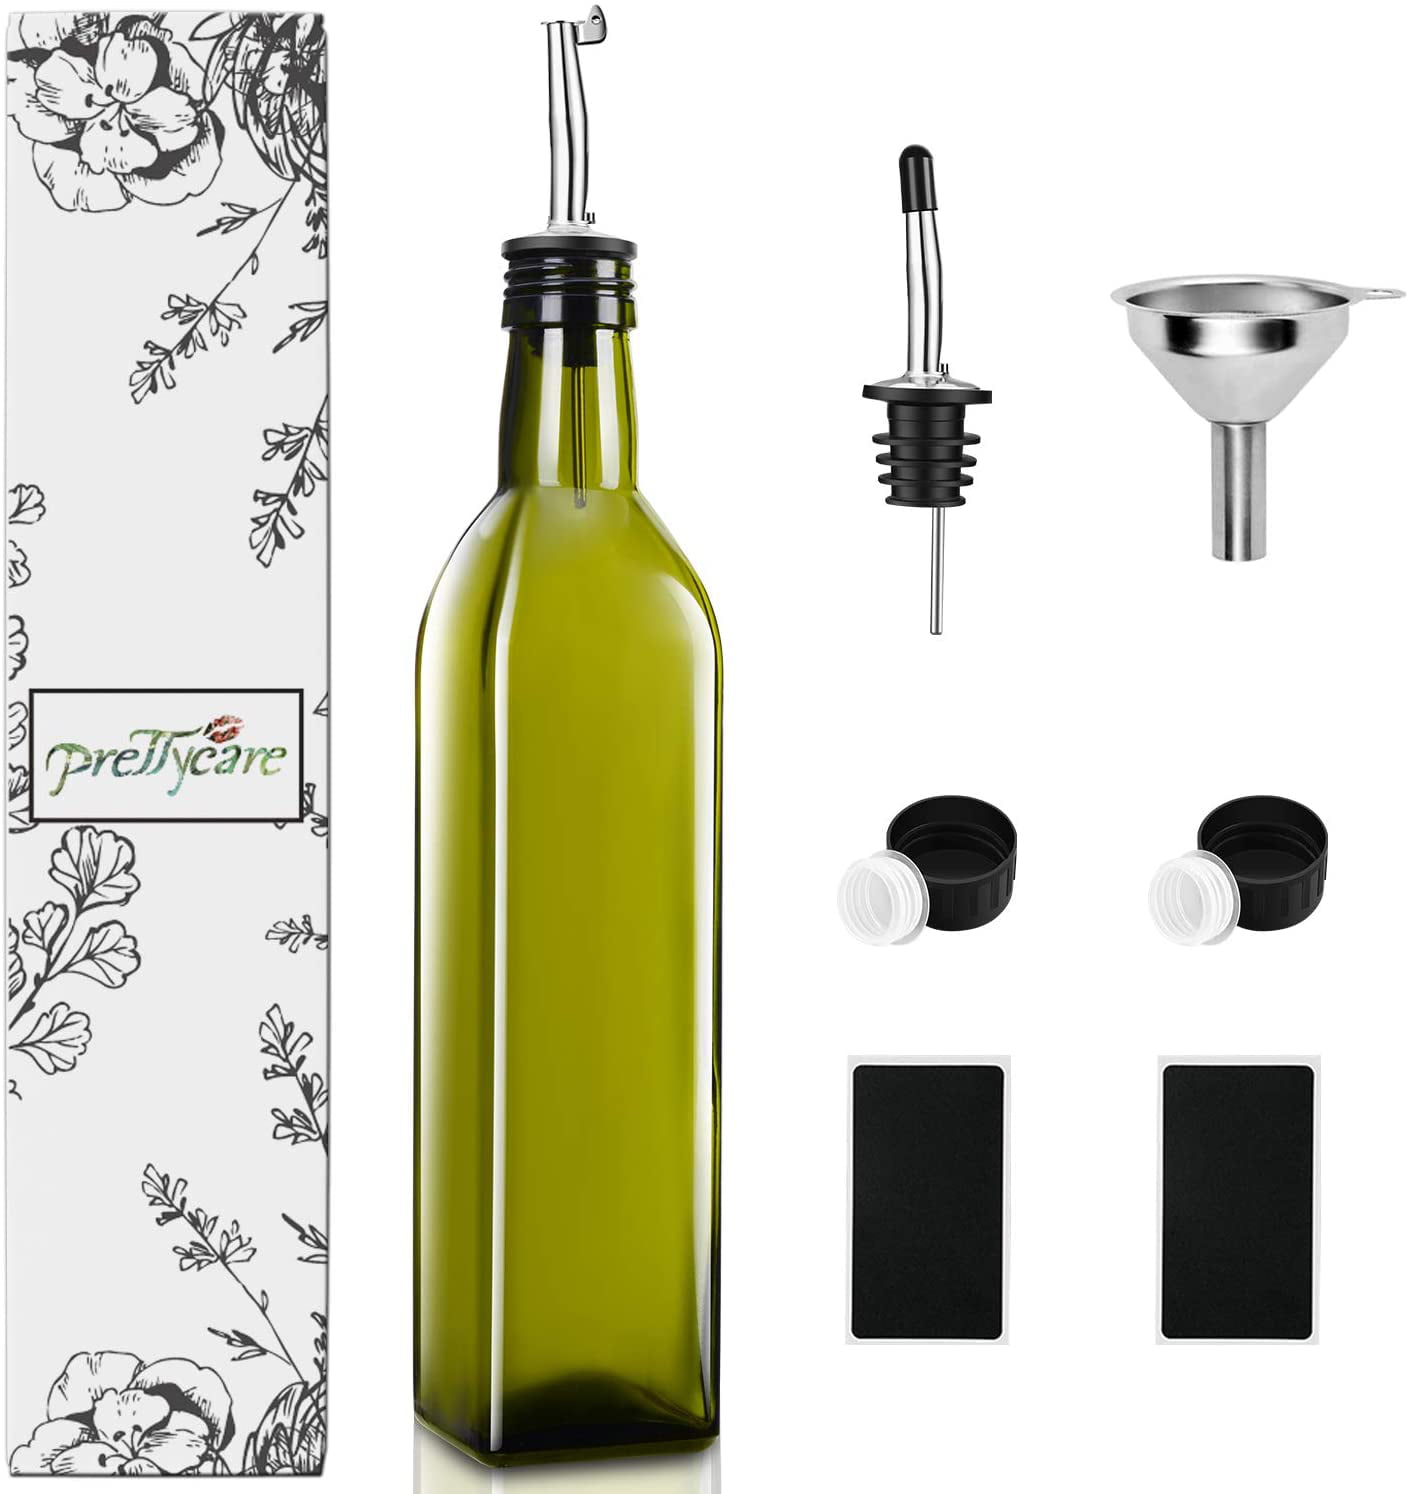 Dark Green Flip Top Pourer Set PrettyCare Olive Oil and Vinegar Dispenser Bottles 17oz Dark Cruet with Extra Lids, Labels and Funnel 500ml Drip-Free Bottle with Stainless Steel Spout 